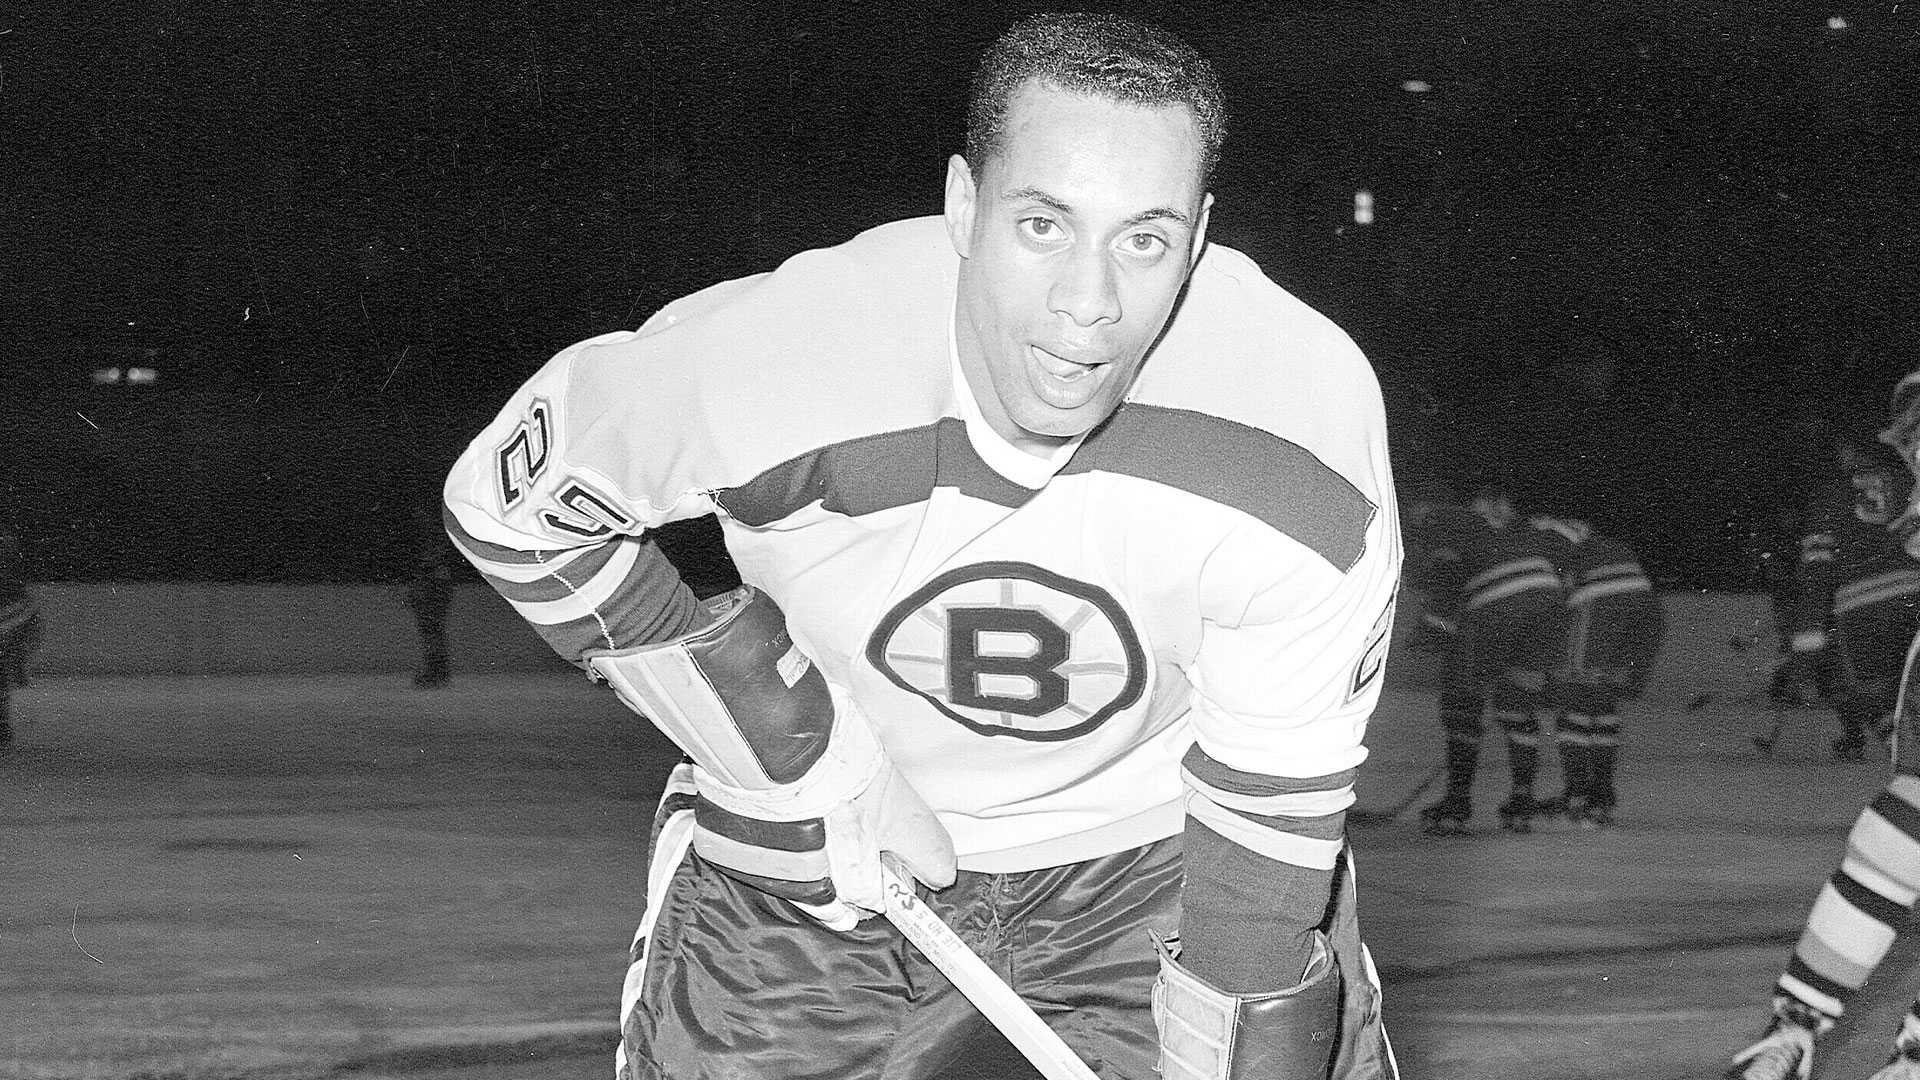 Bruins to honor Willie O'Ree